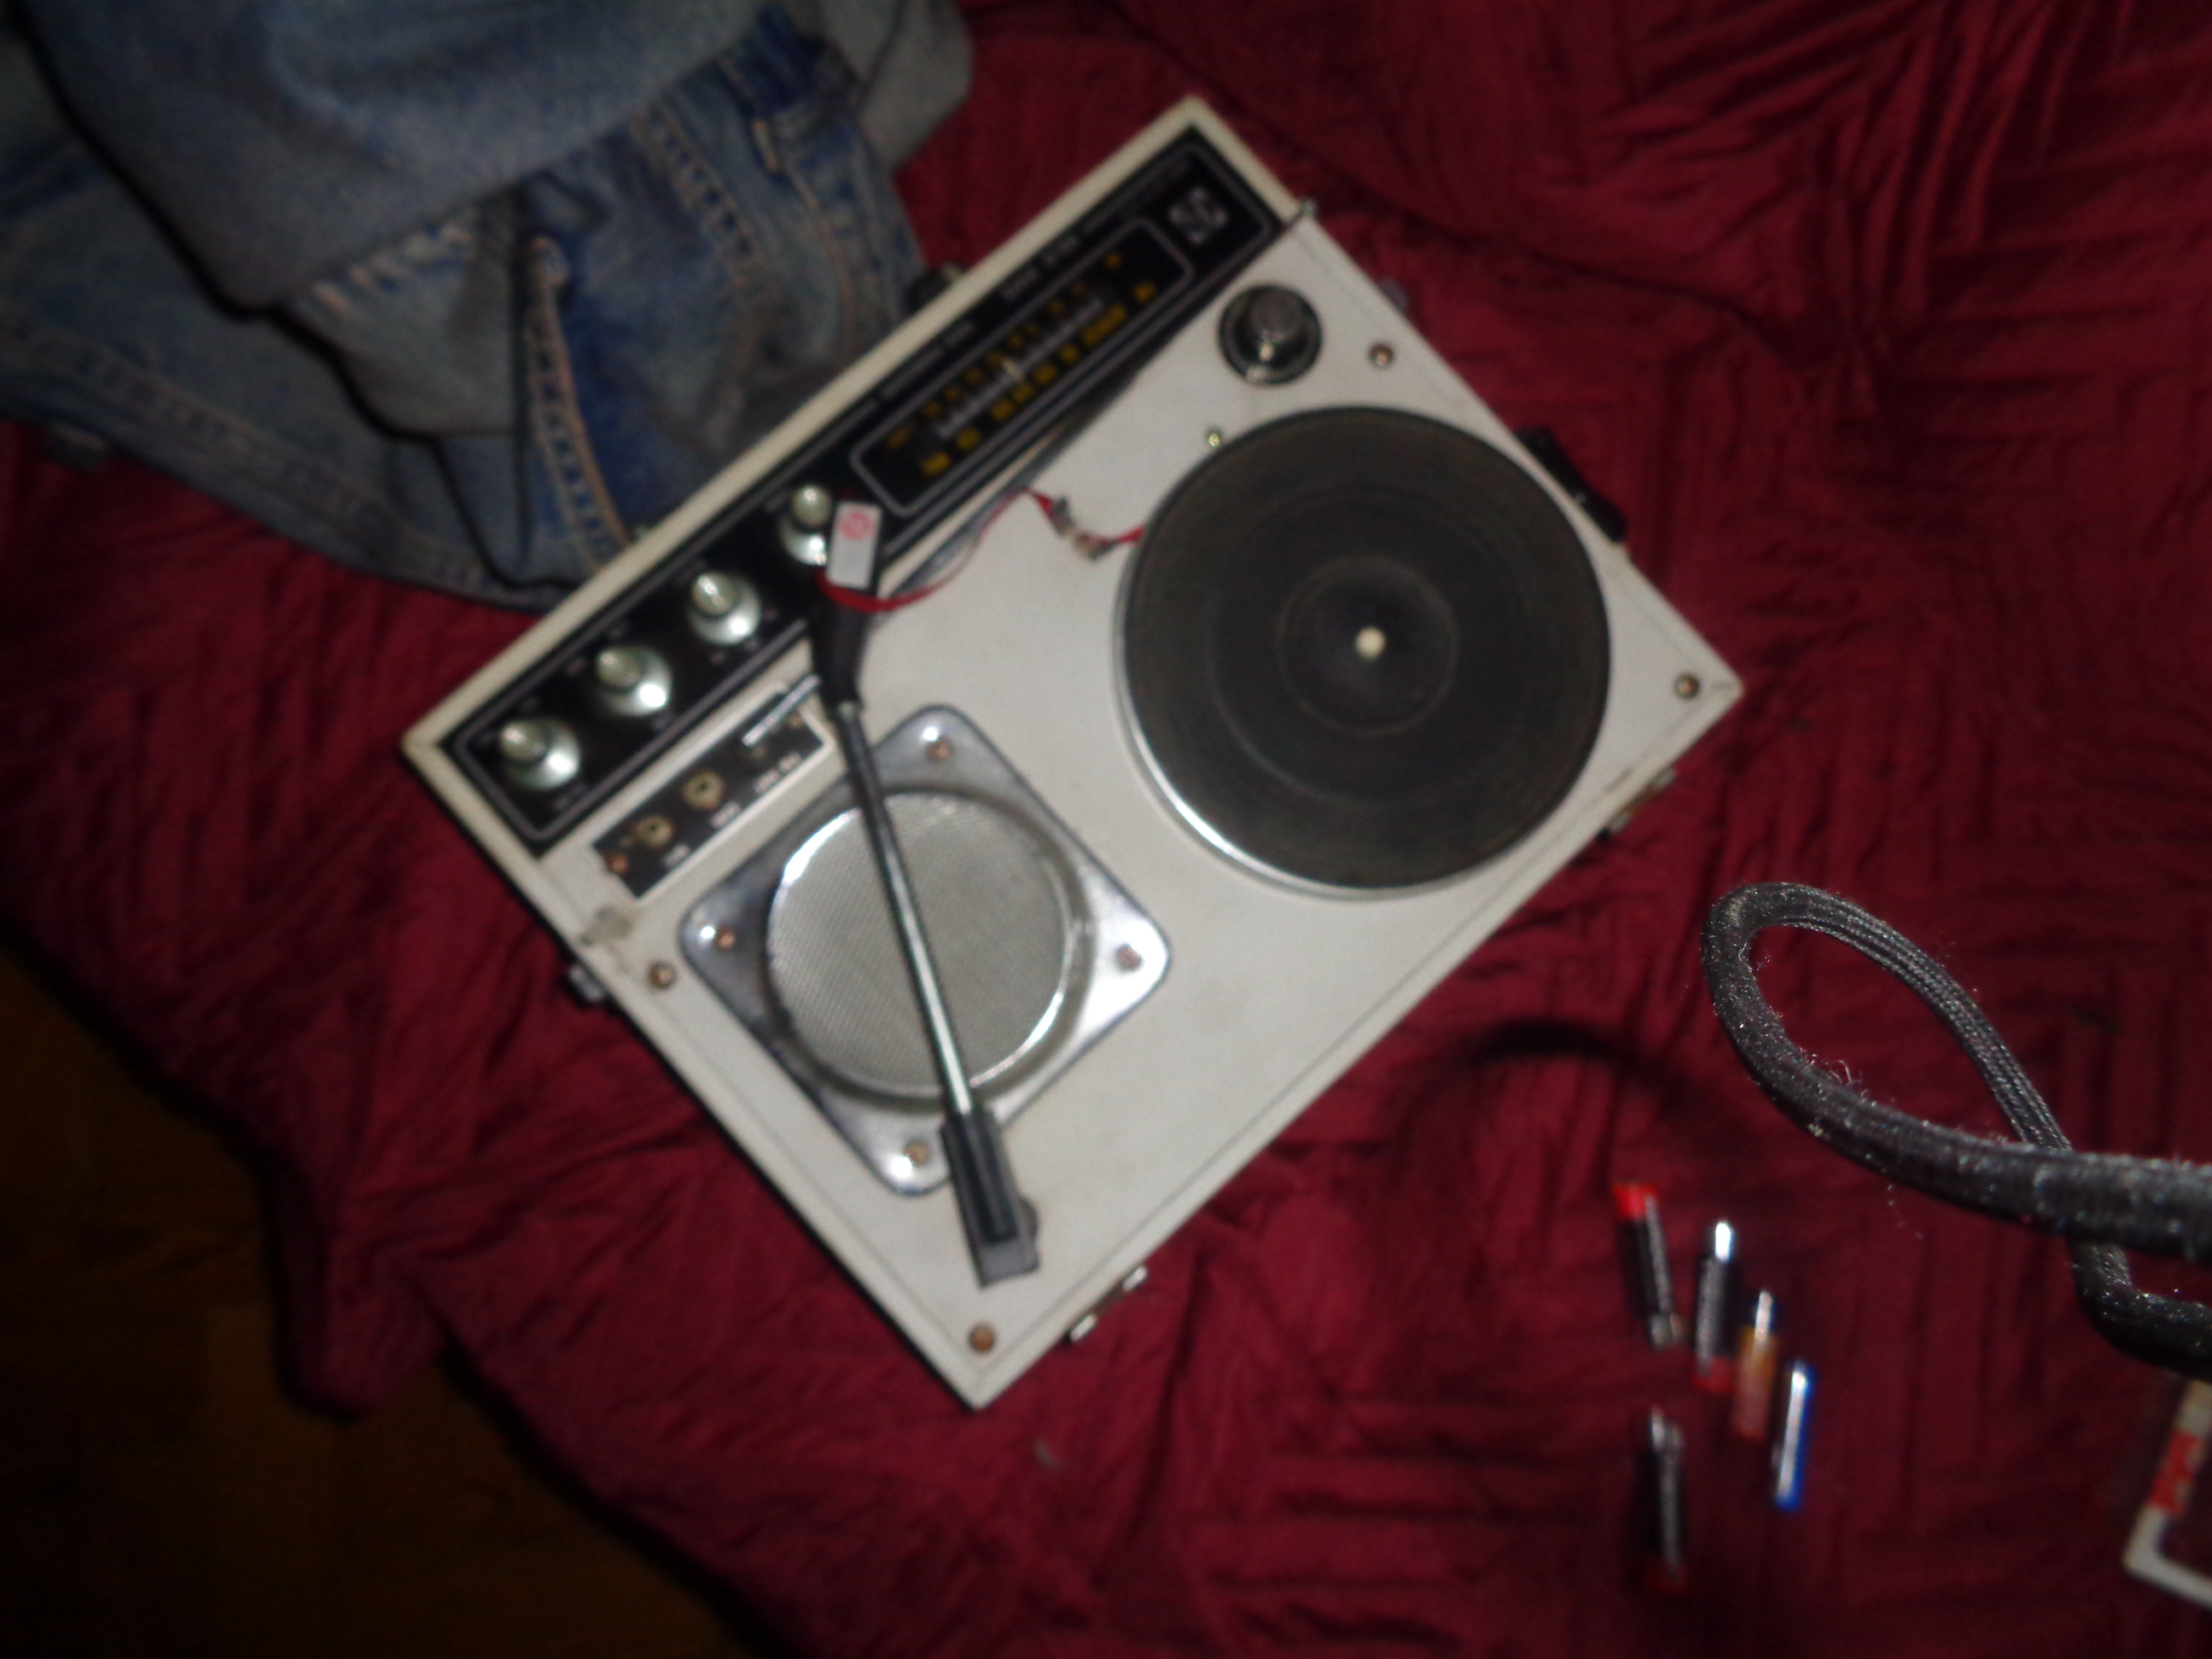 A photo of a turntable.